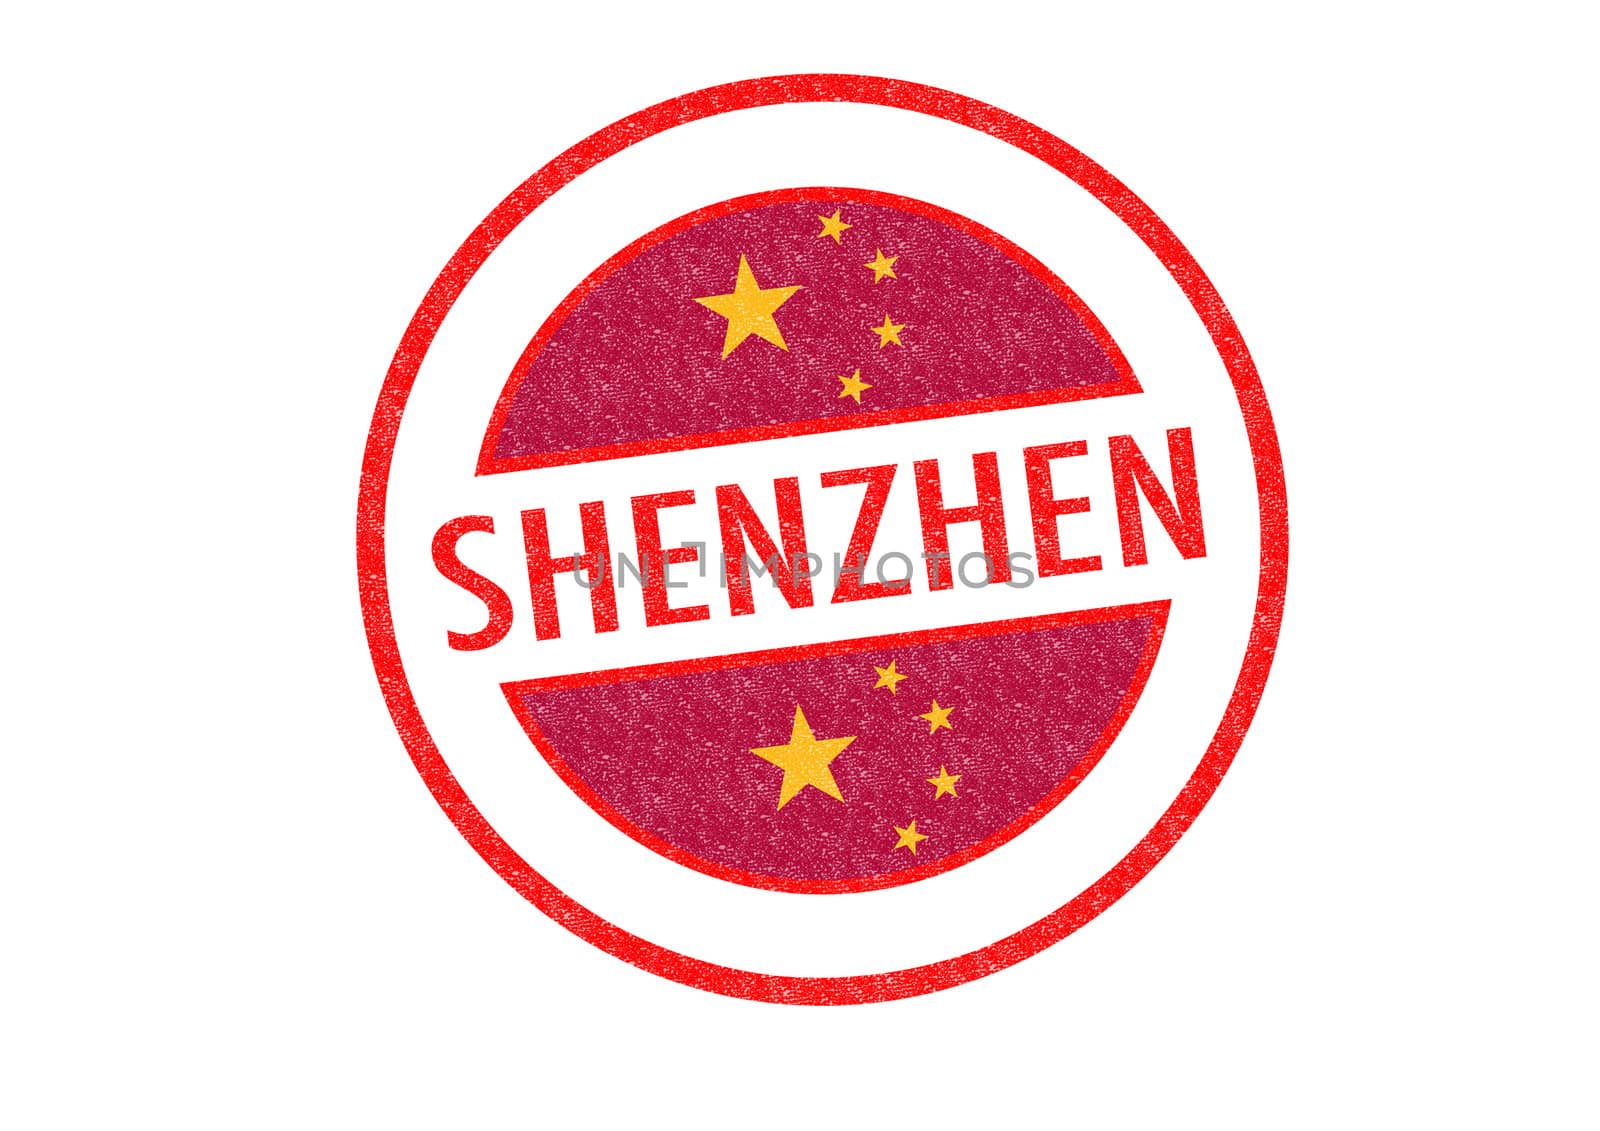 Passport-style SHENZHEN (China) rubber stamp over a white background.